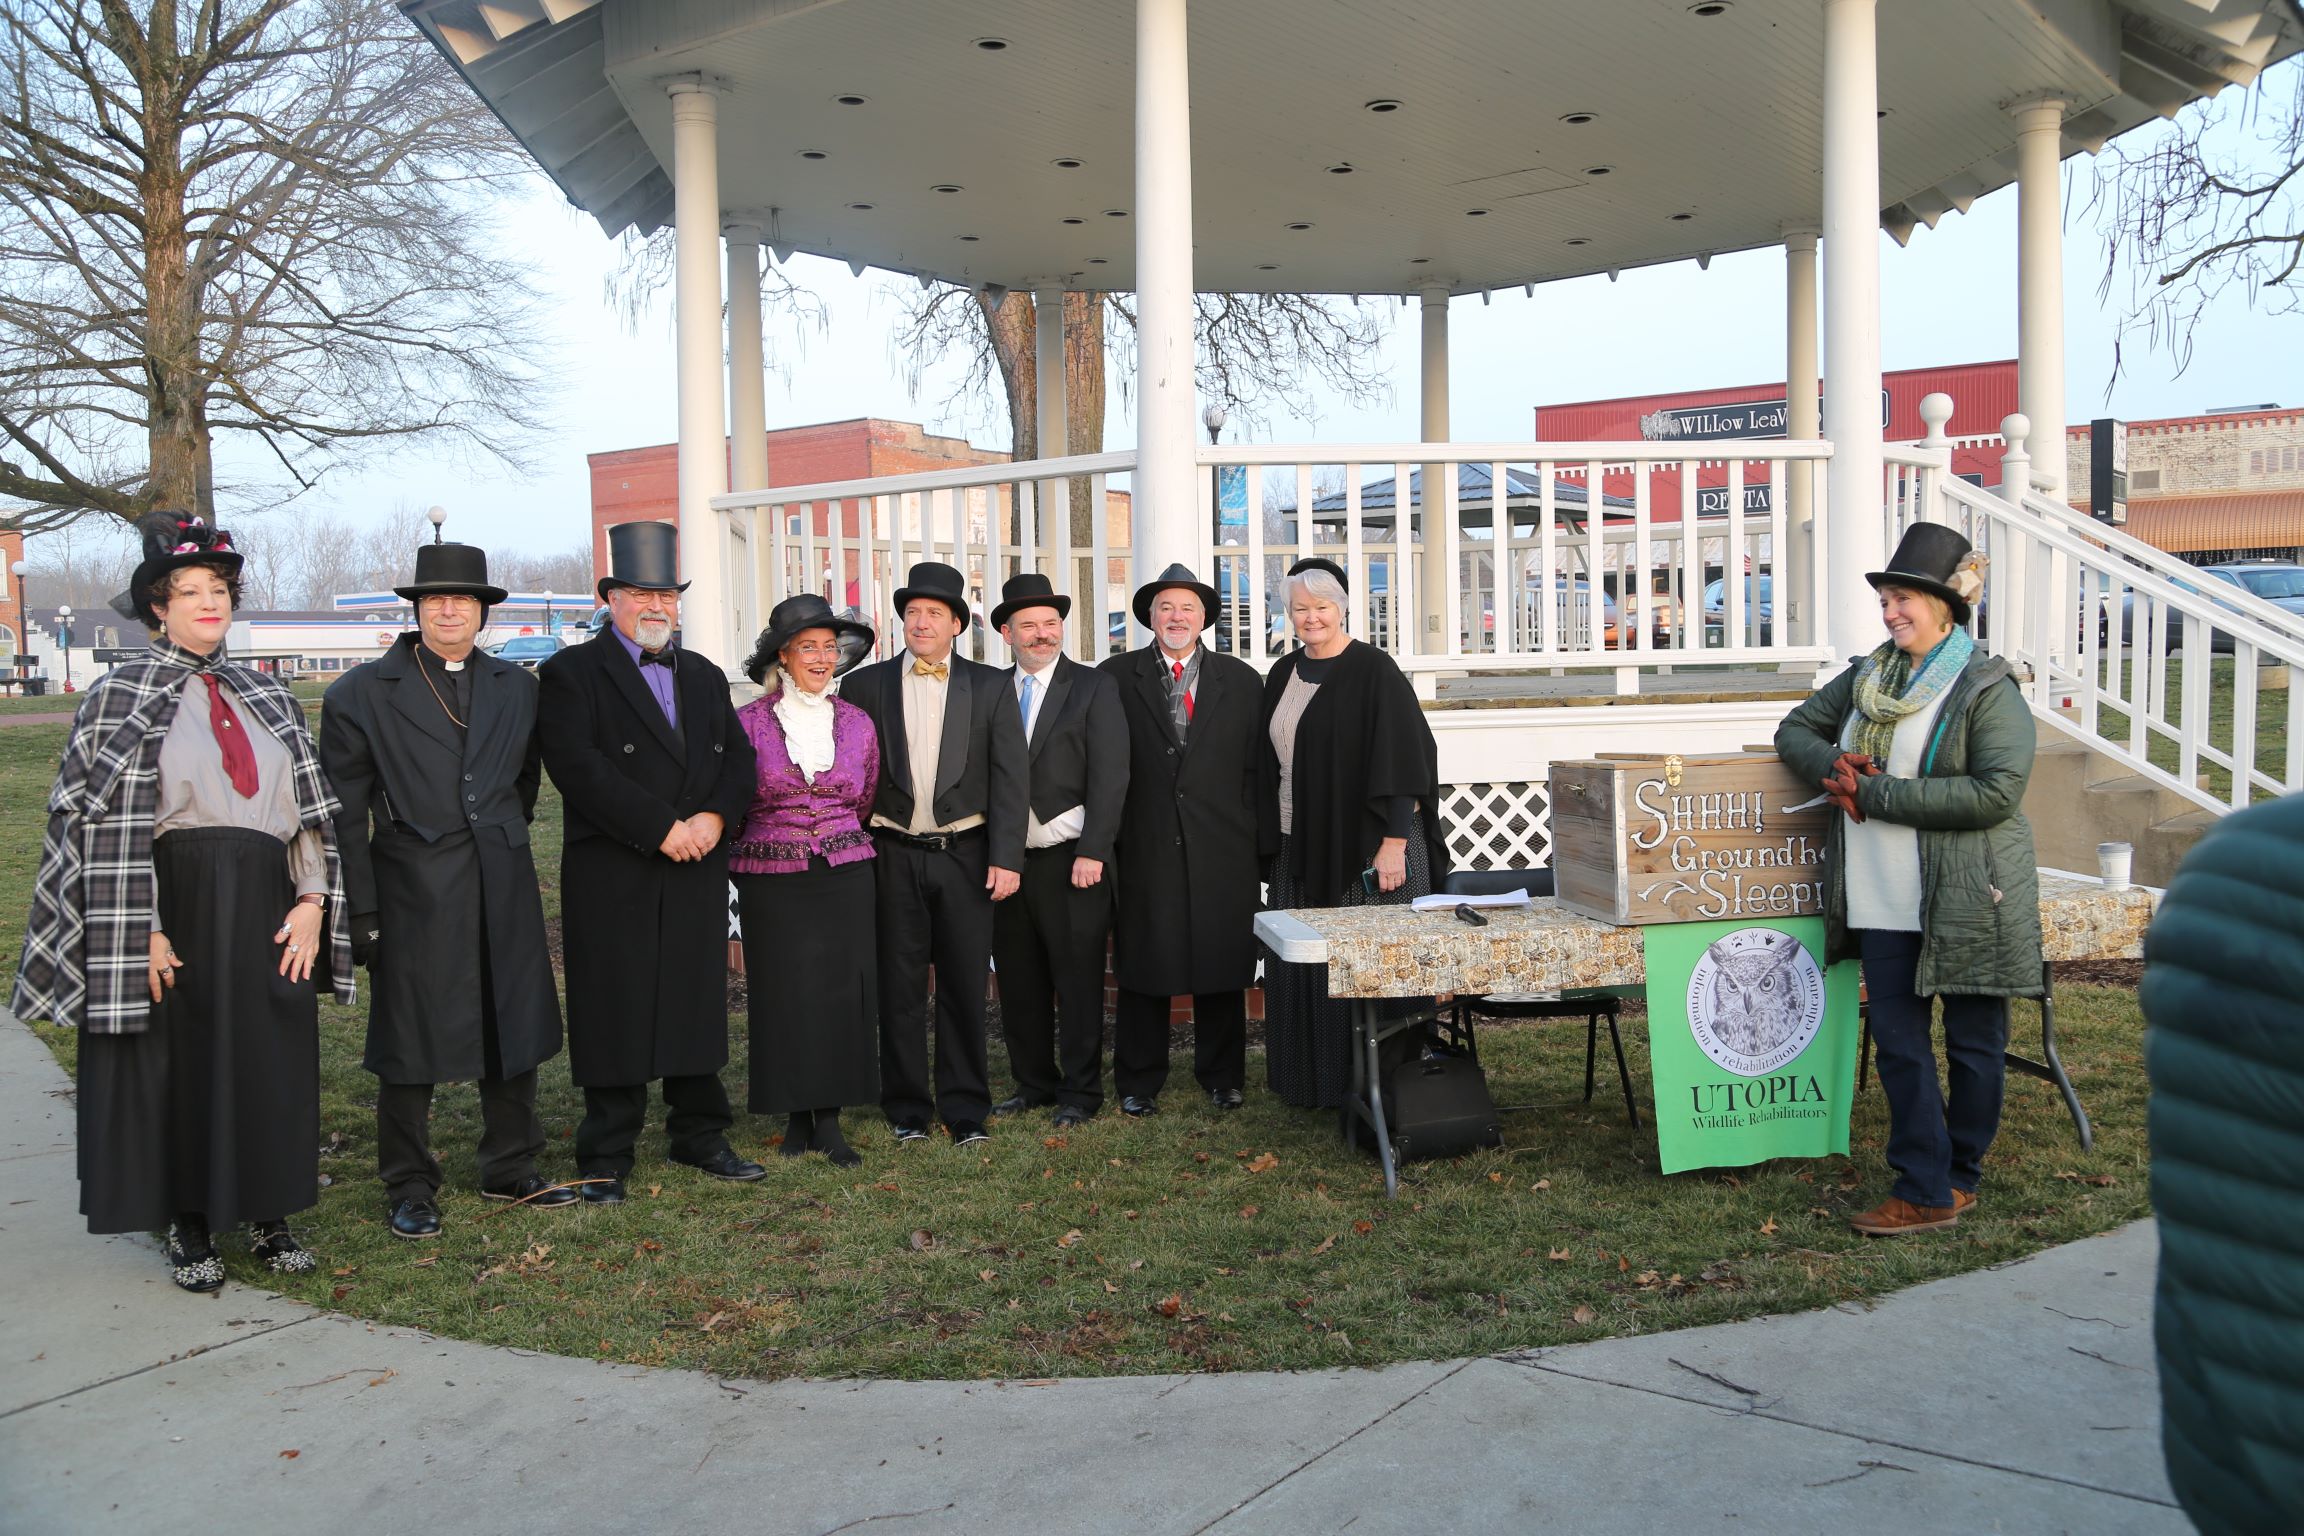 Volunteers at the Hope, Indiana Groundhog Day ceremony gather for a photo.